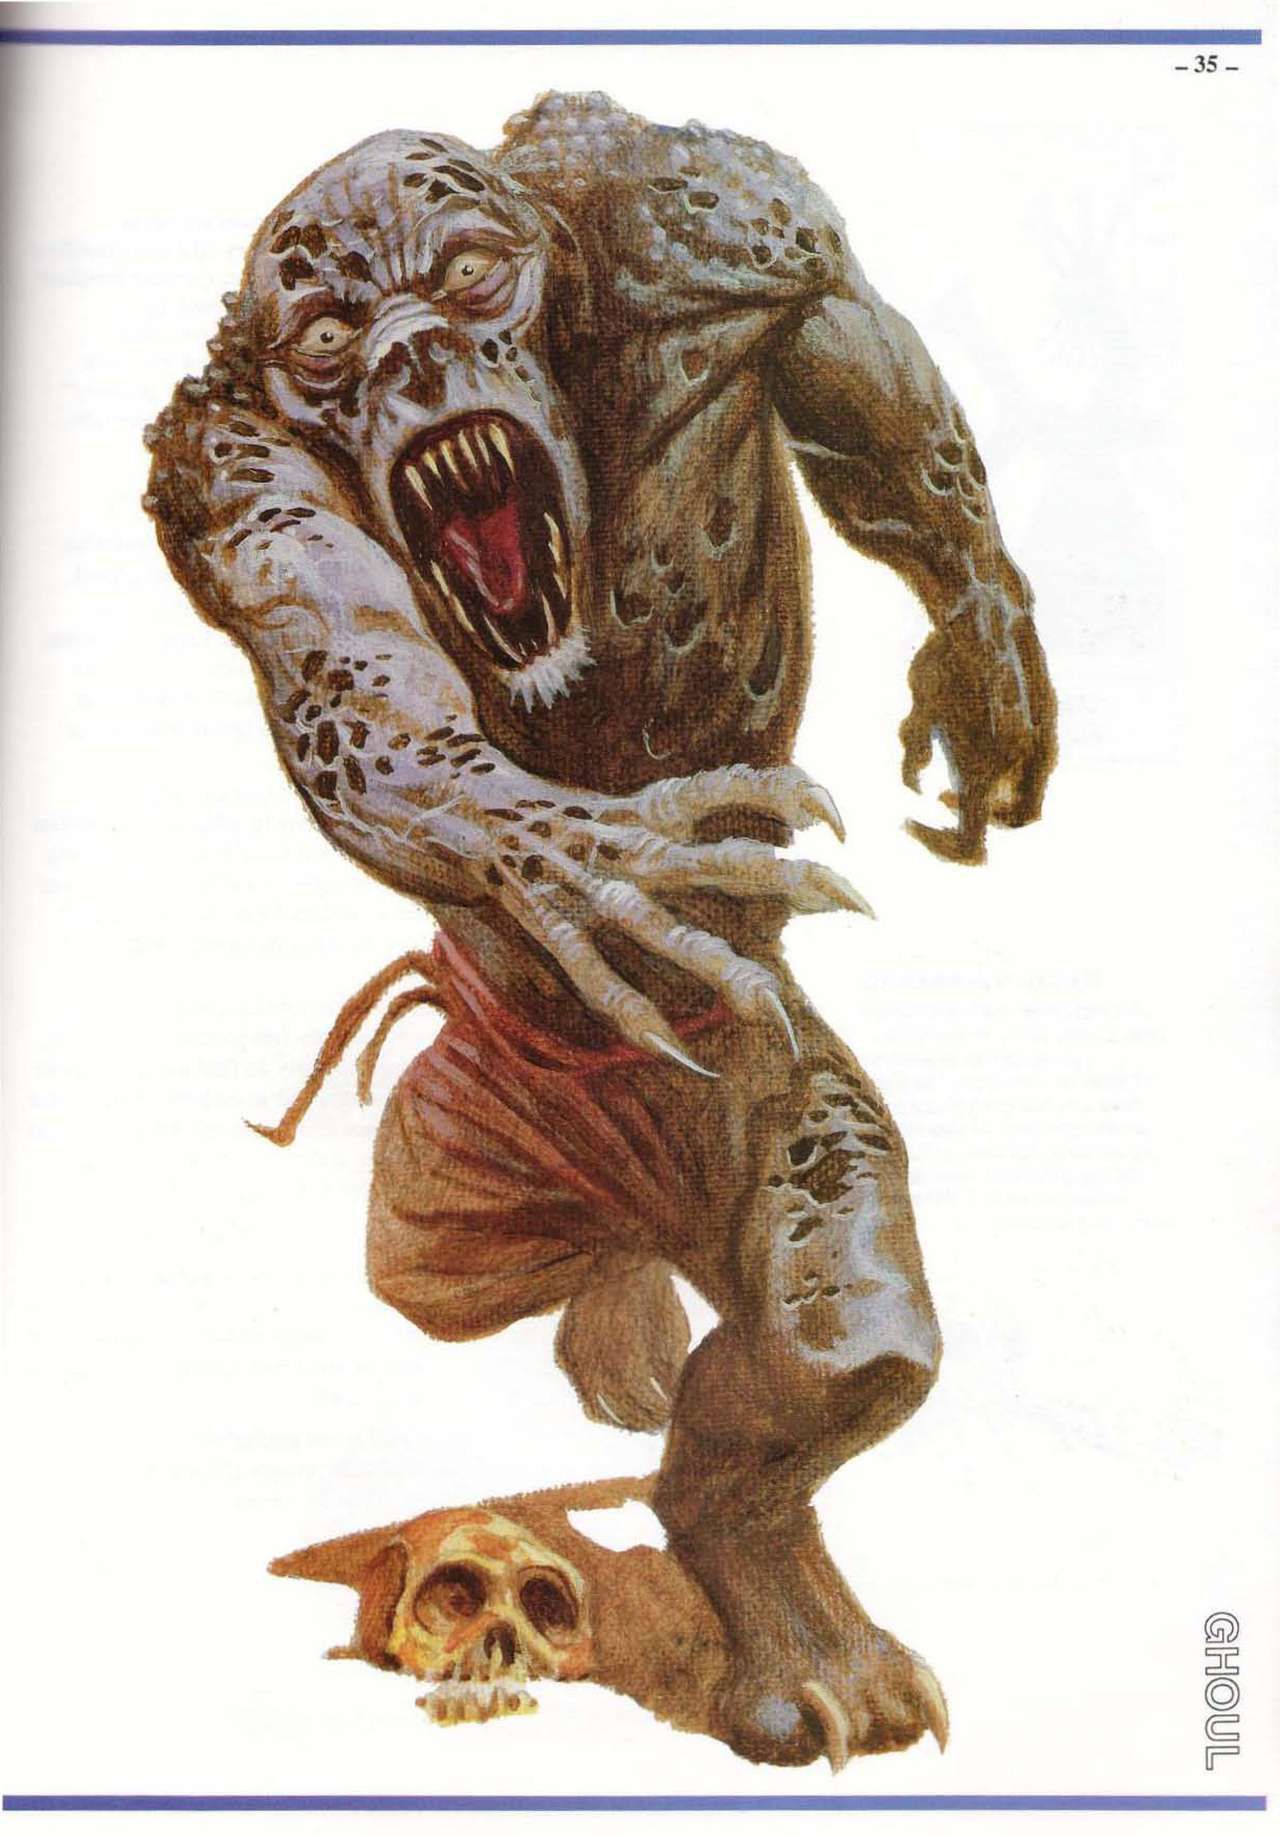 S. Petersen's Field Guide to Lovecraftian Horrors 35